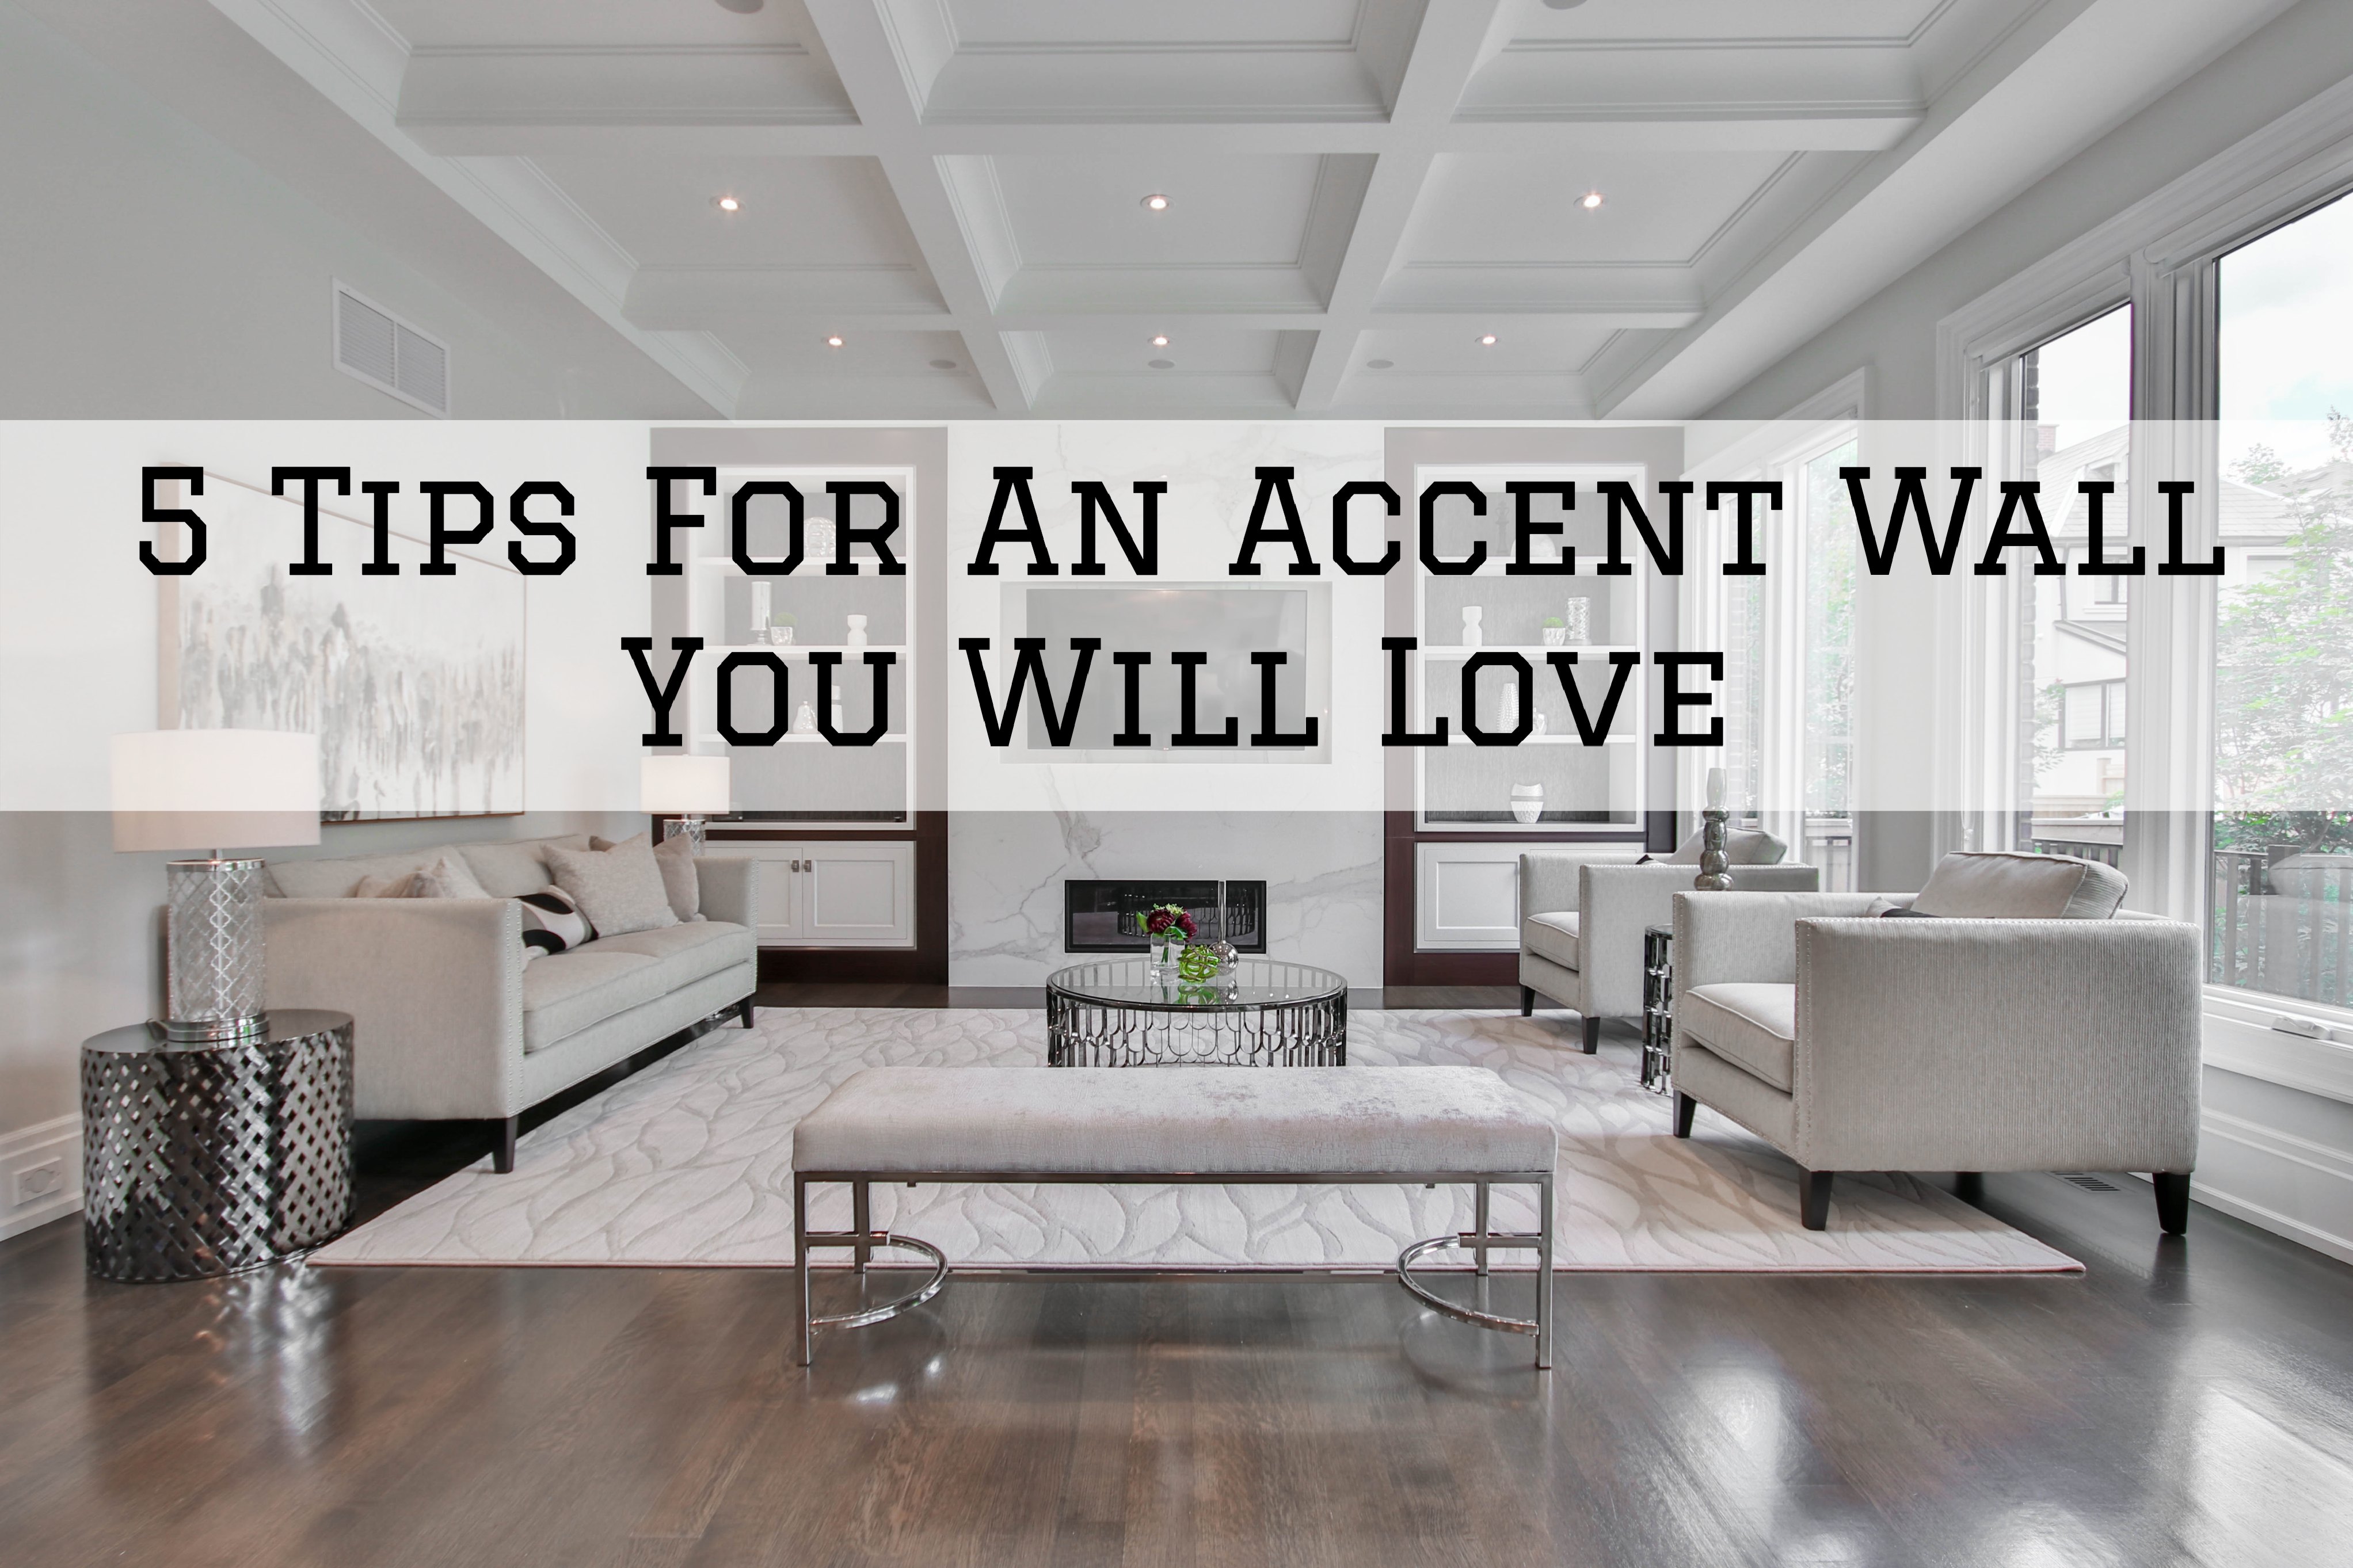 5 Tips For An Accent Wall You Will Love in Ottawa, Ontario